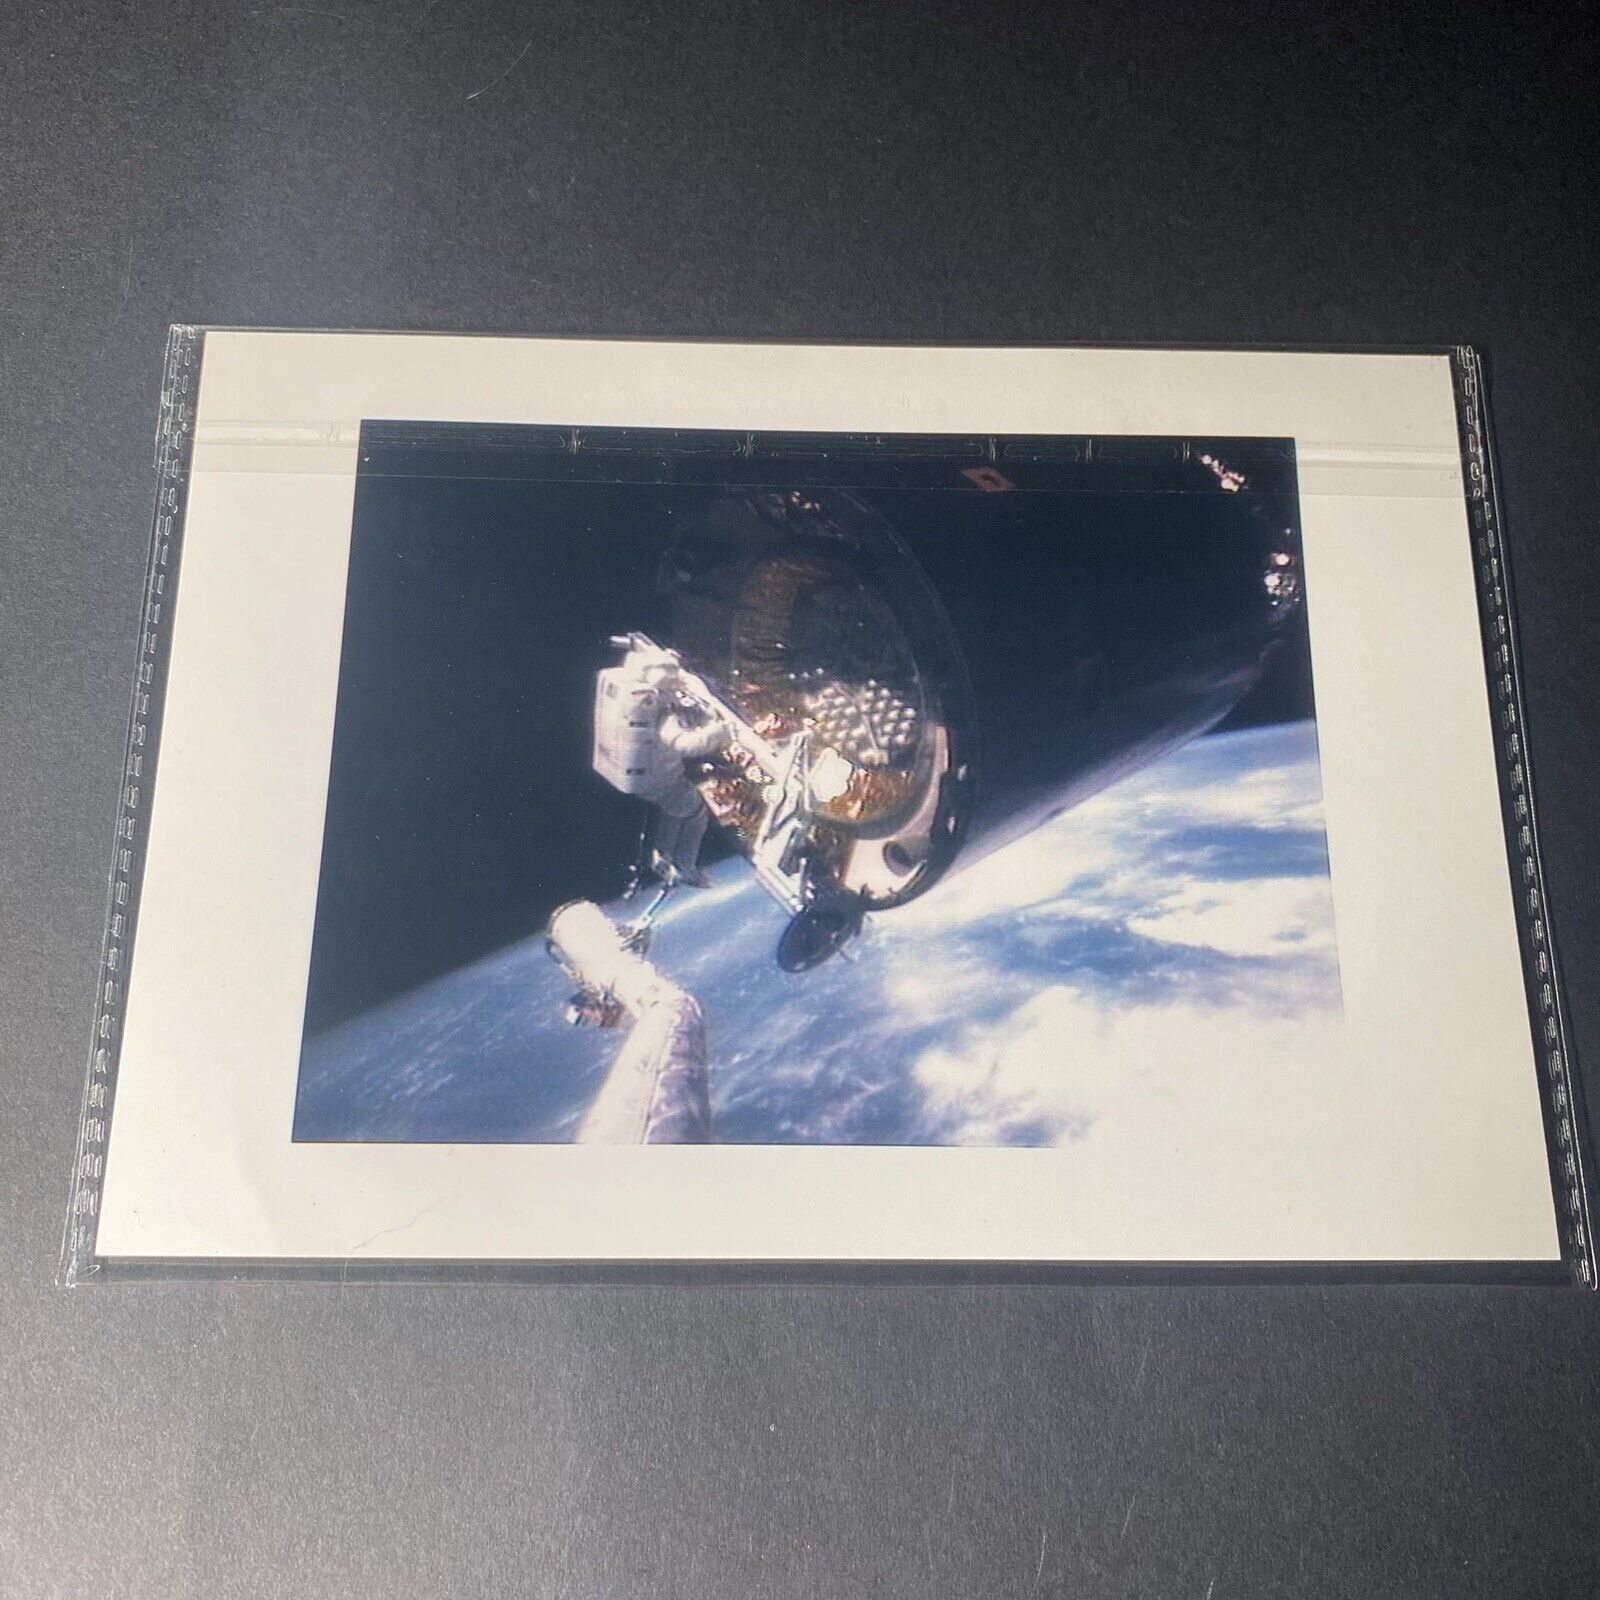 Official NASA Photo 1992 STS-49 Thuot in space grapple bar Intelsat VI satellite